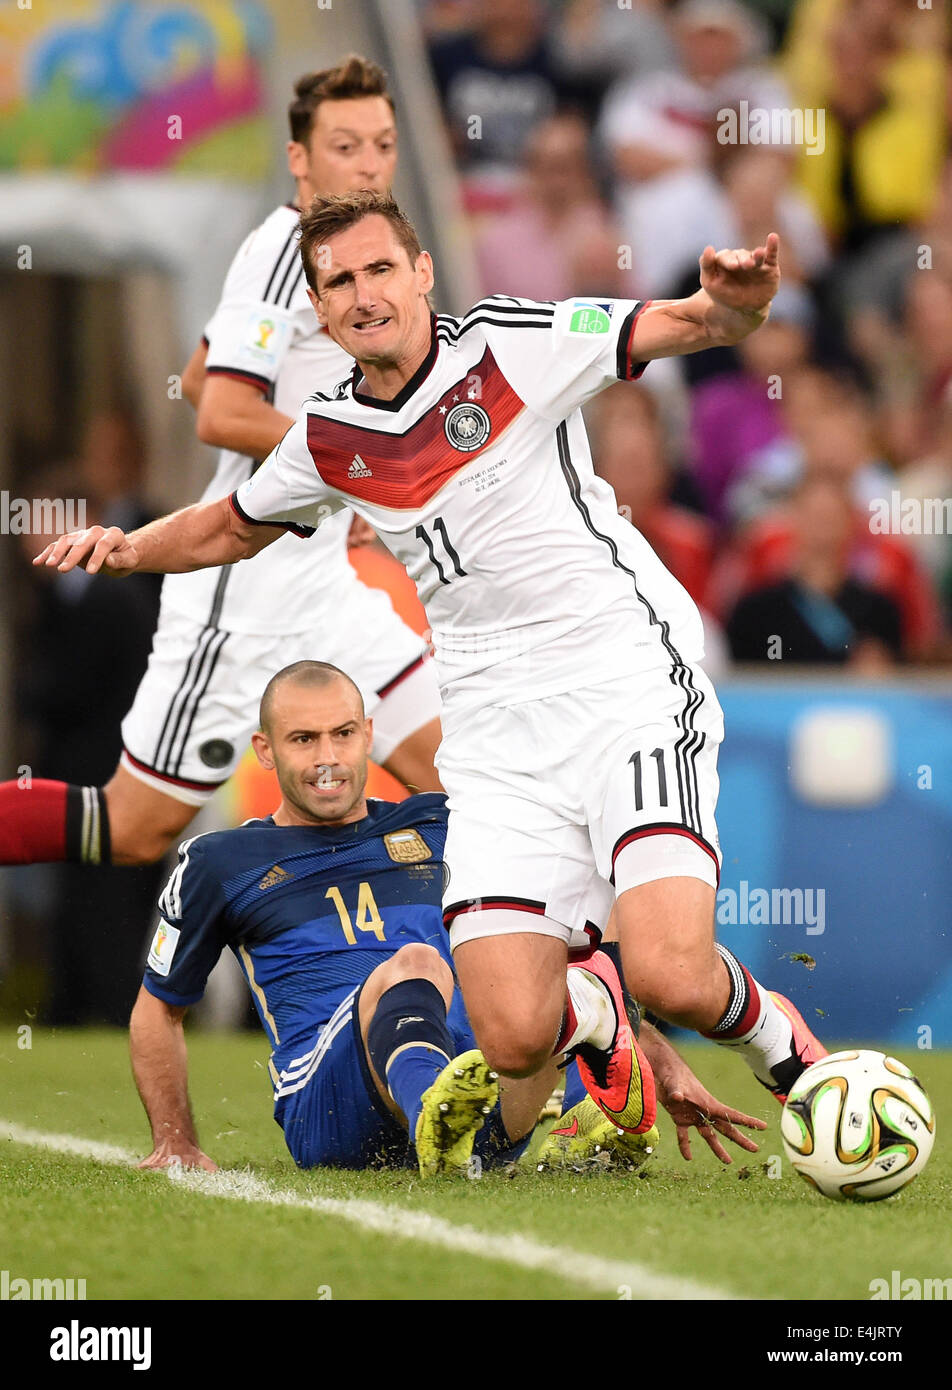 Rio de Janeiro, Brazil. 13th July, 2014. Miroslav Klose of Germany is fouled by Javier Mascherano of Argentina vie for the ball during the FIFA World Cup 2014 final soccer match between Germany and Argentina at the Estadio do Maracana in Rio de Janeiro, Brazil, 13 July 2014. Photo: Marcus Brandt/dpa/Alamy Live News Stock Photo